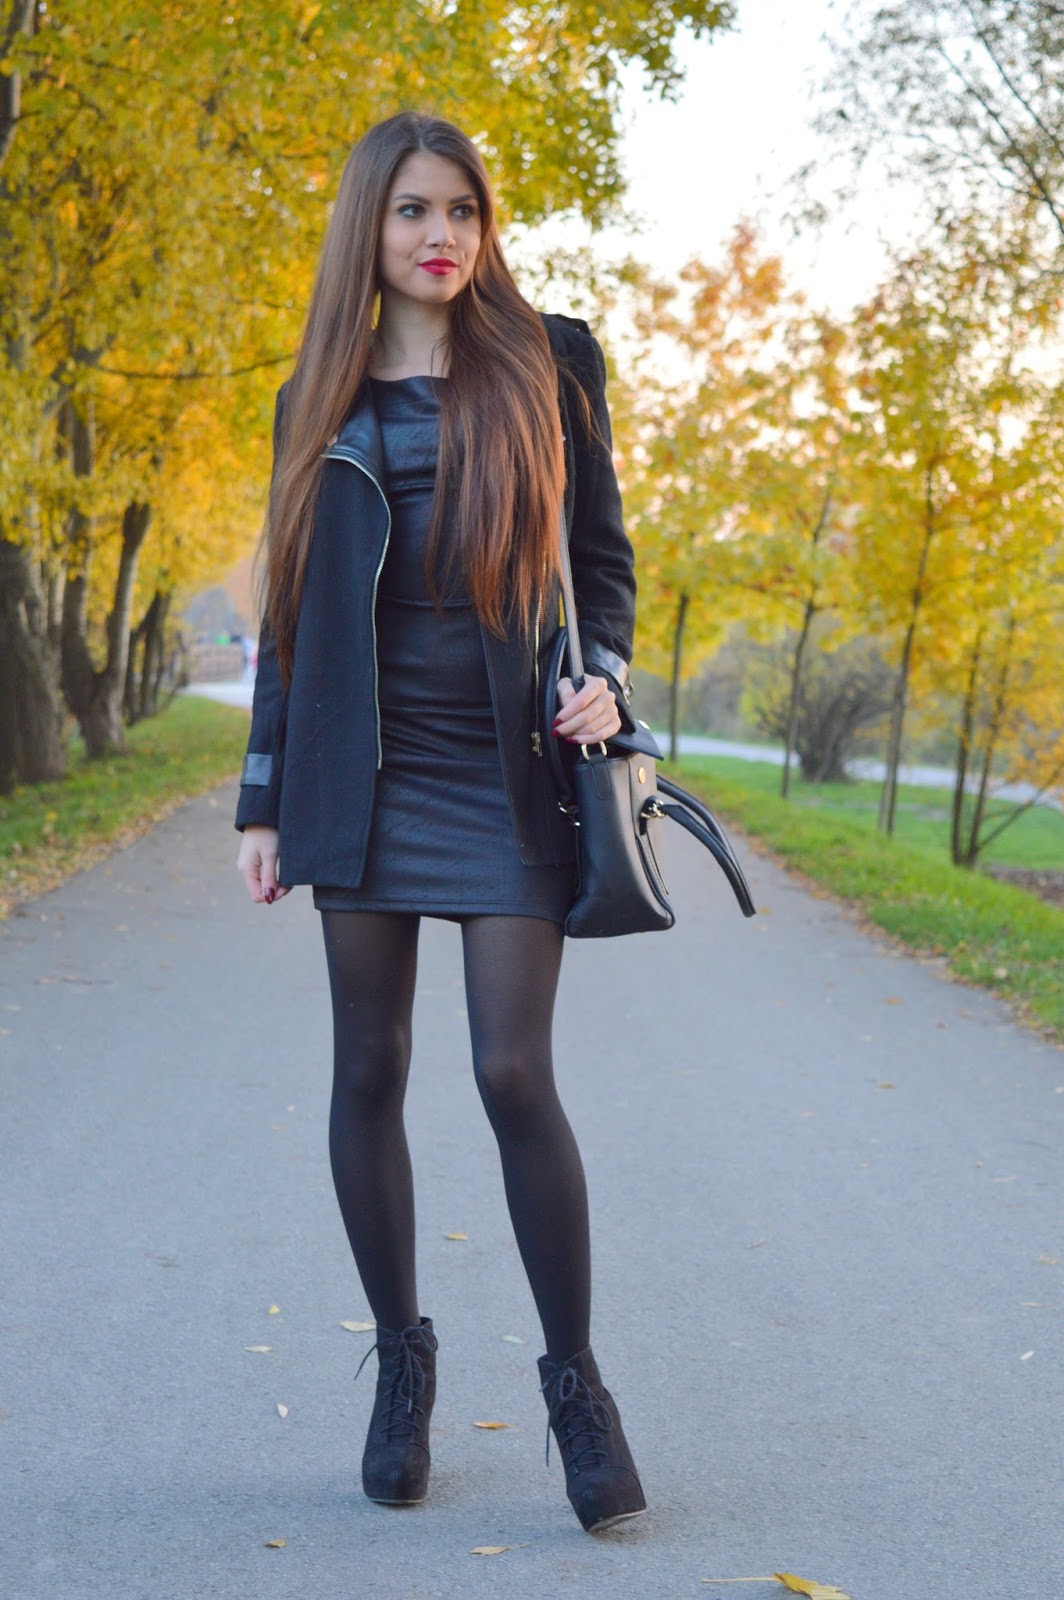 Fashion for your legs: All black